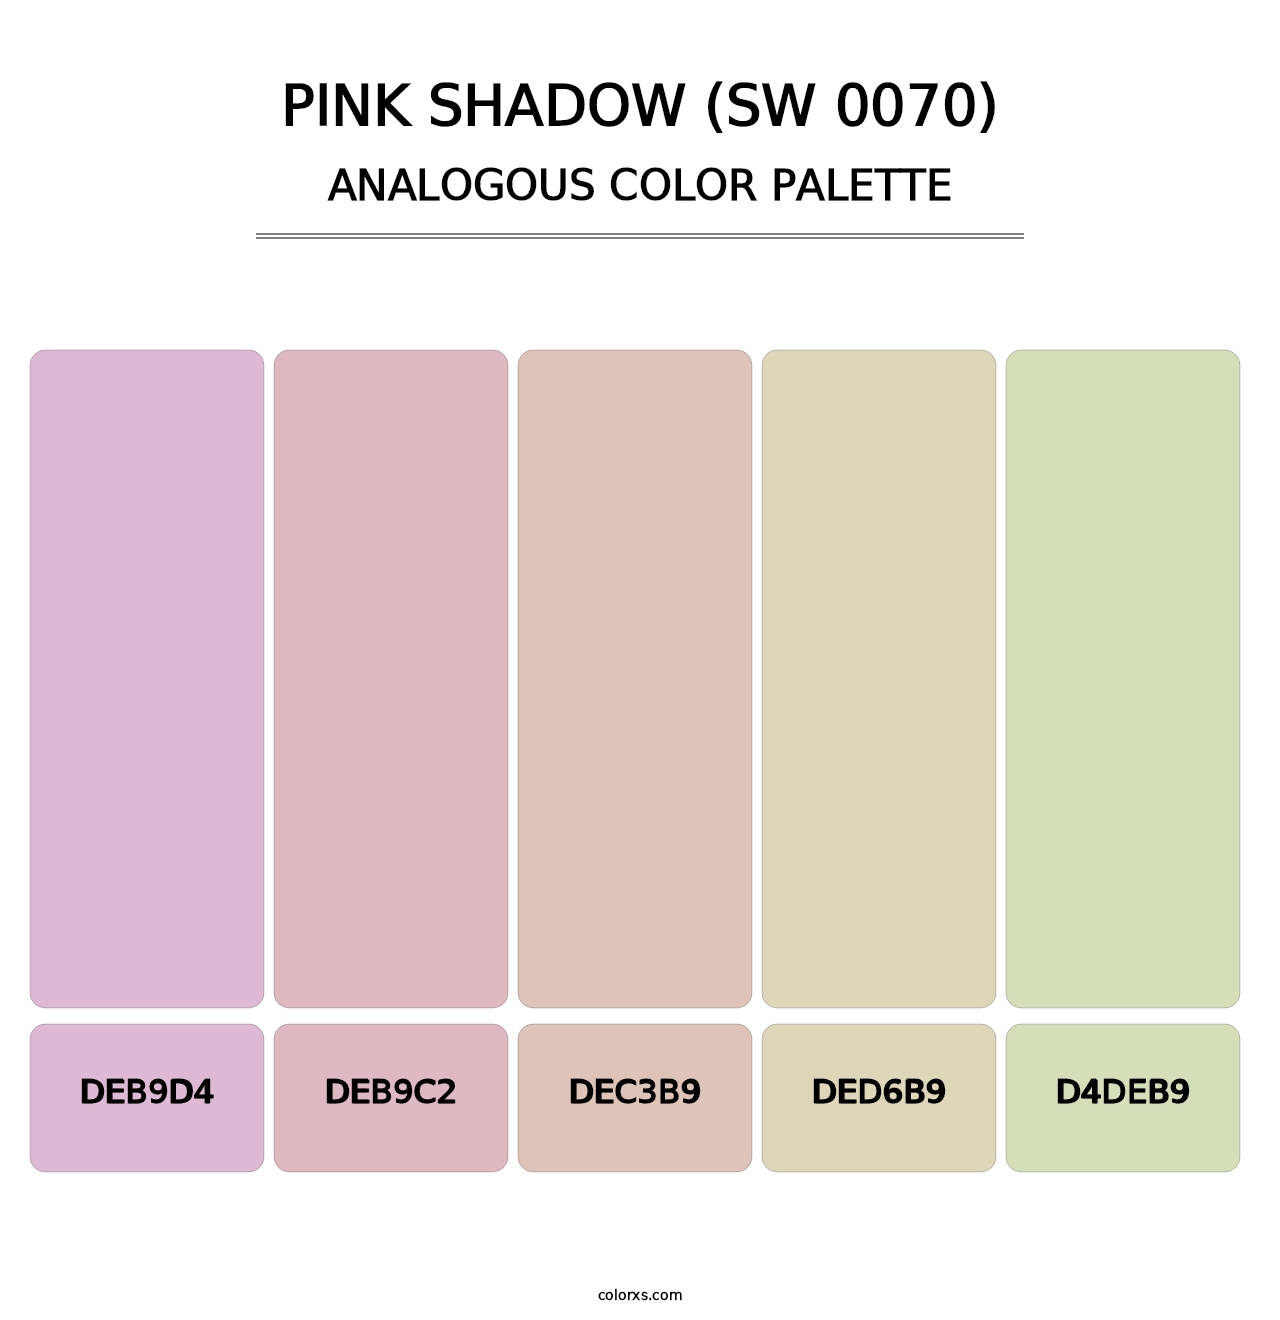 Pink Shadow (SW 0070) - Analogous Color Palette